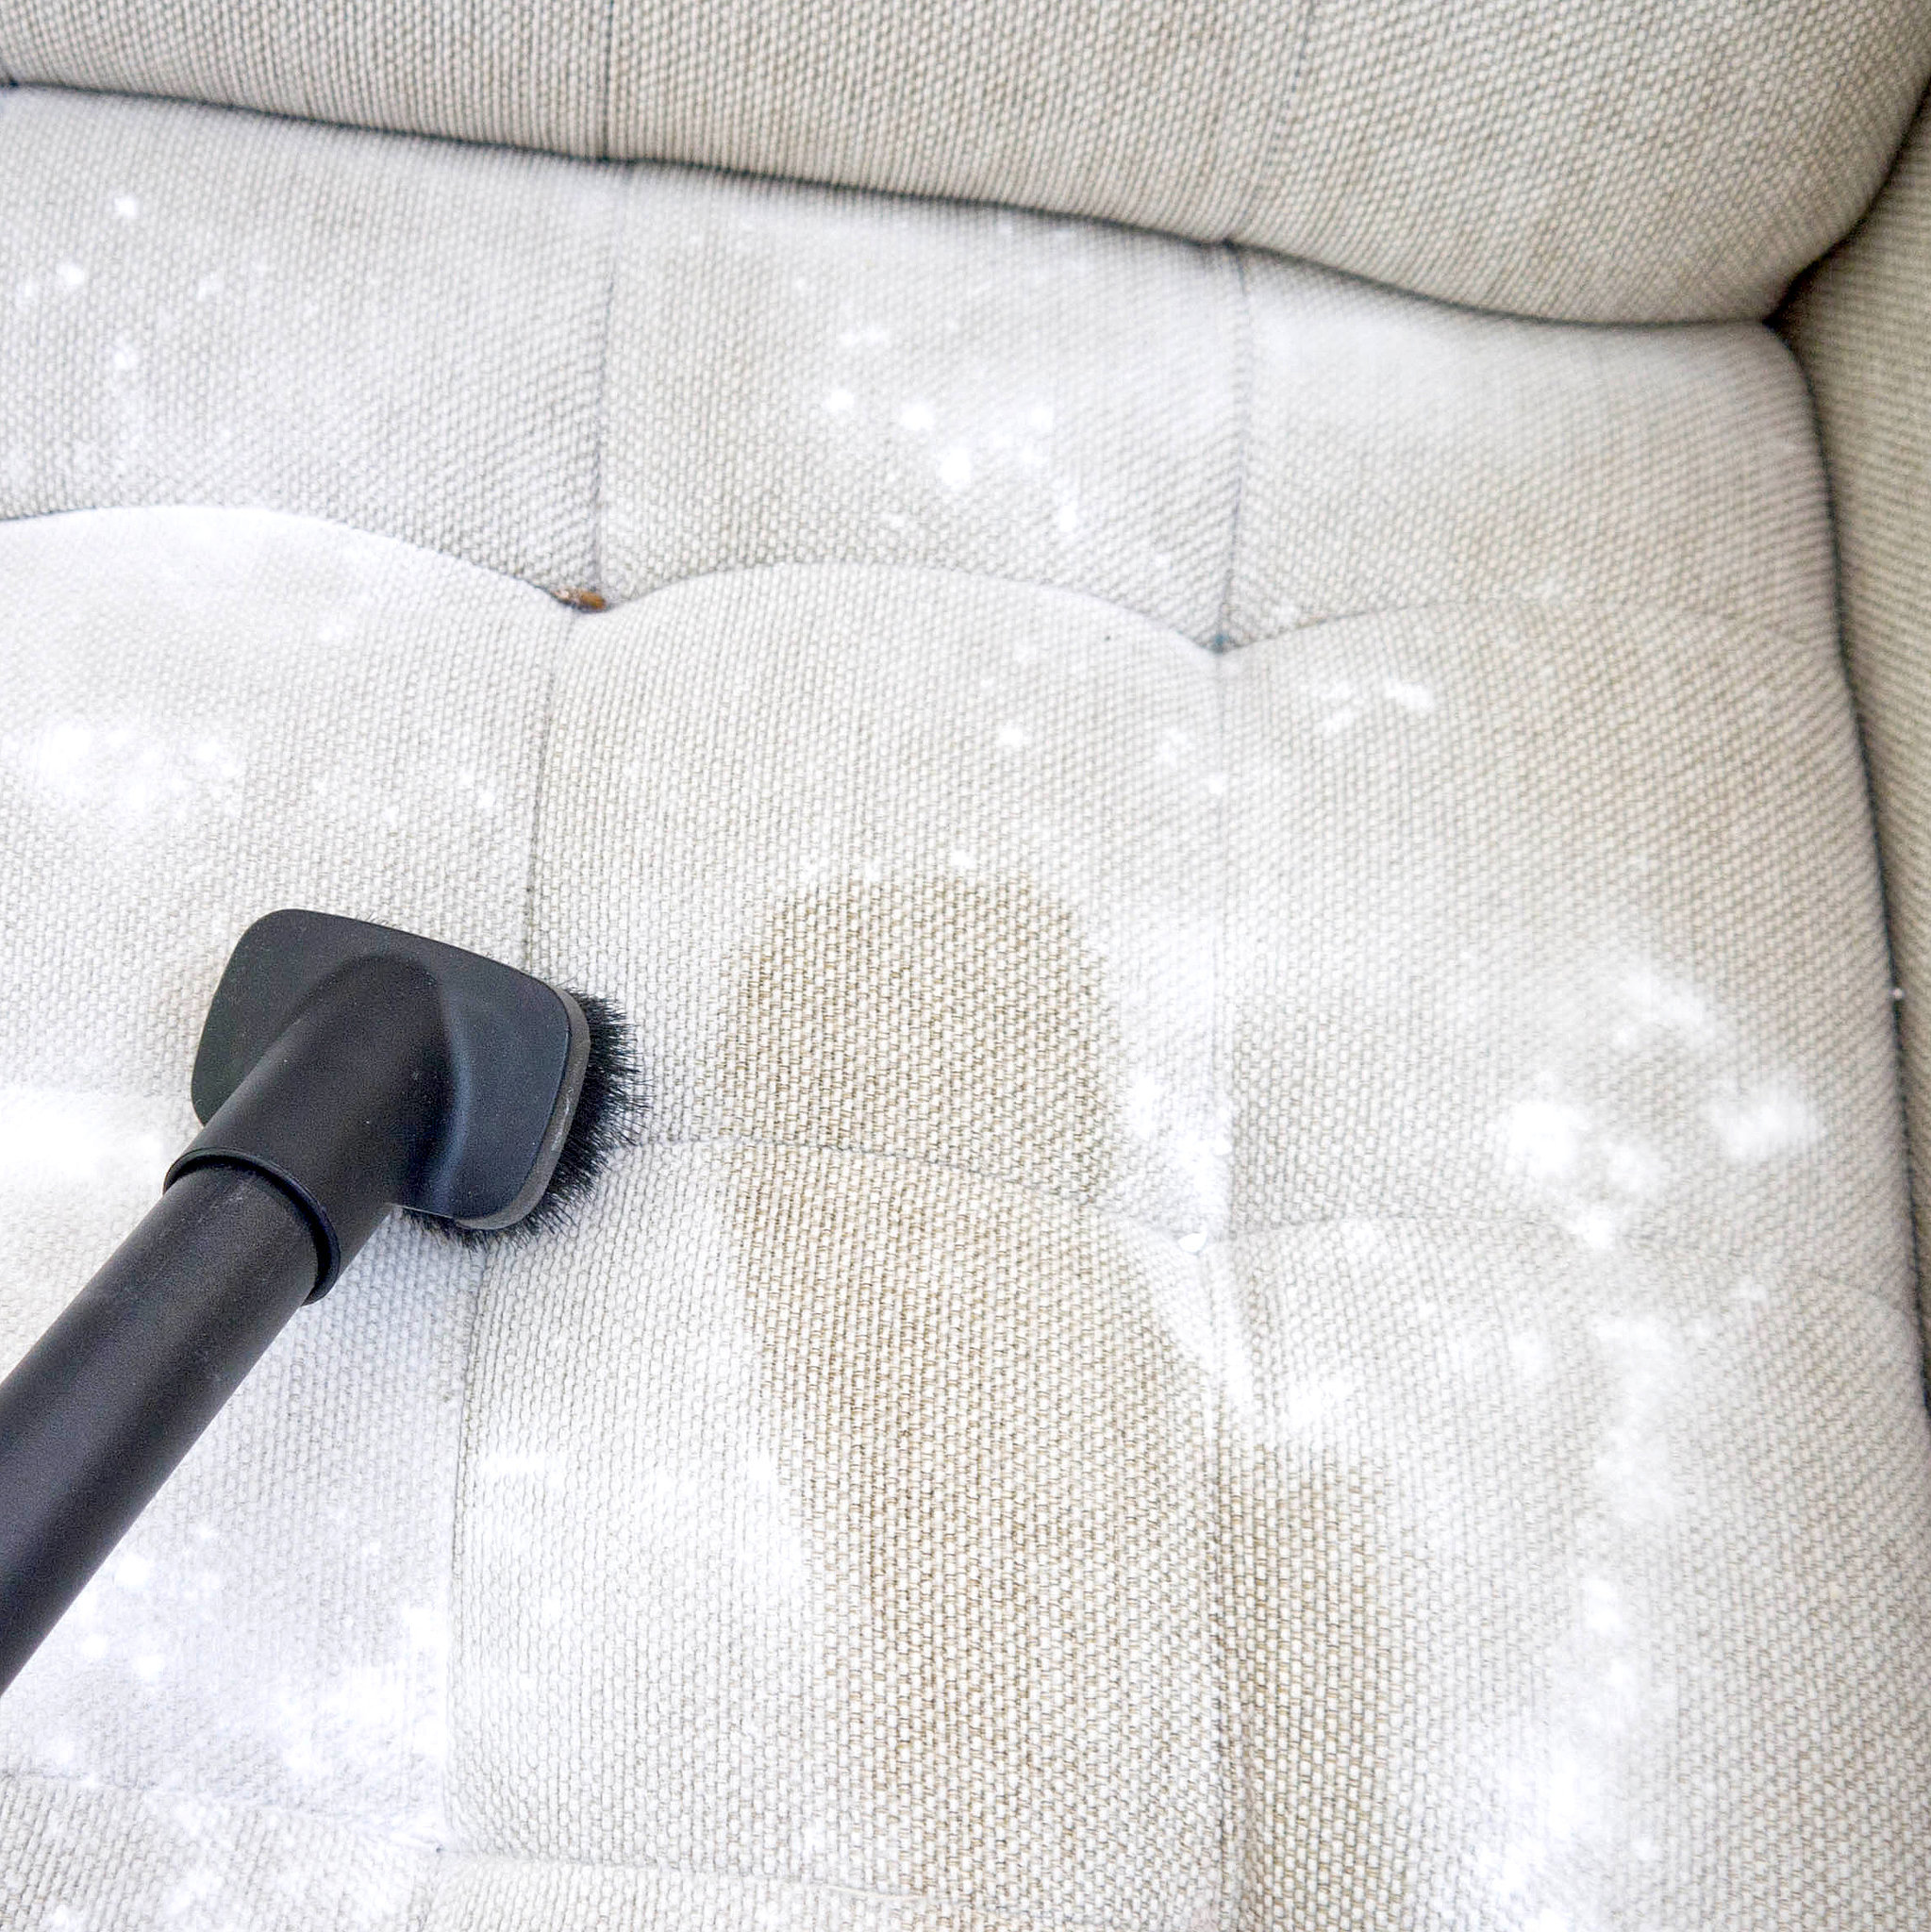 How To Clean A Natural Fabric Couch, How To Clean Fabric Chairs